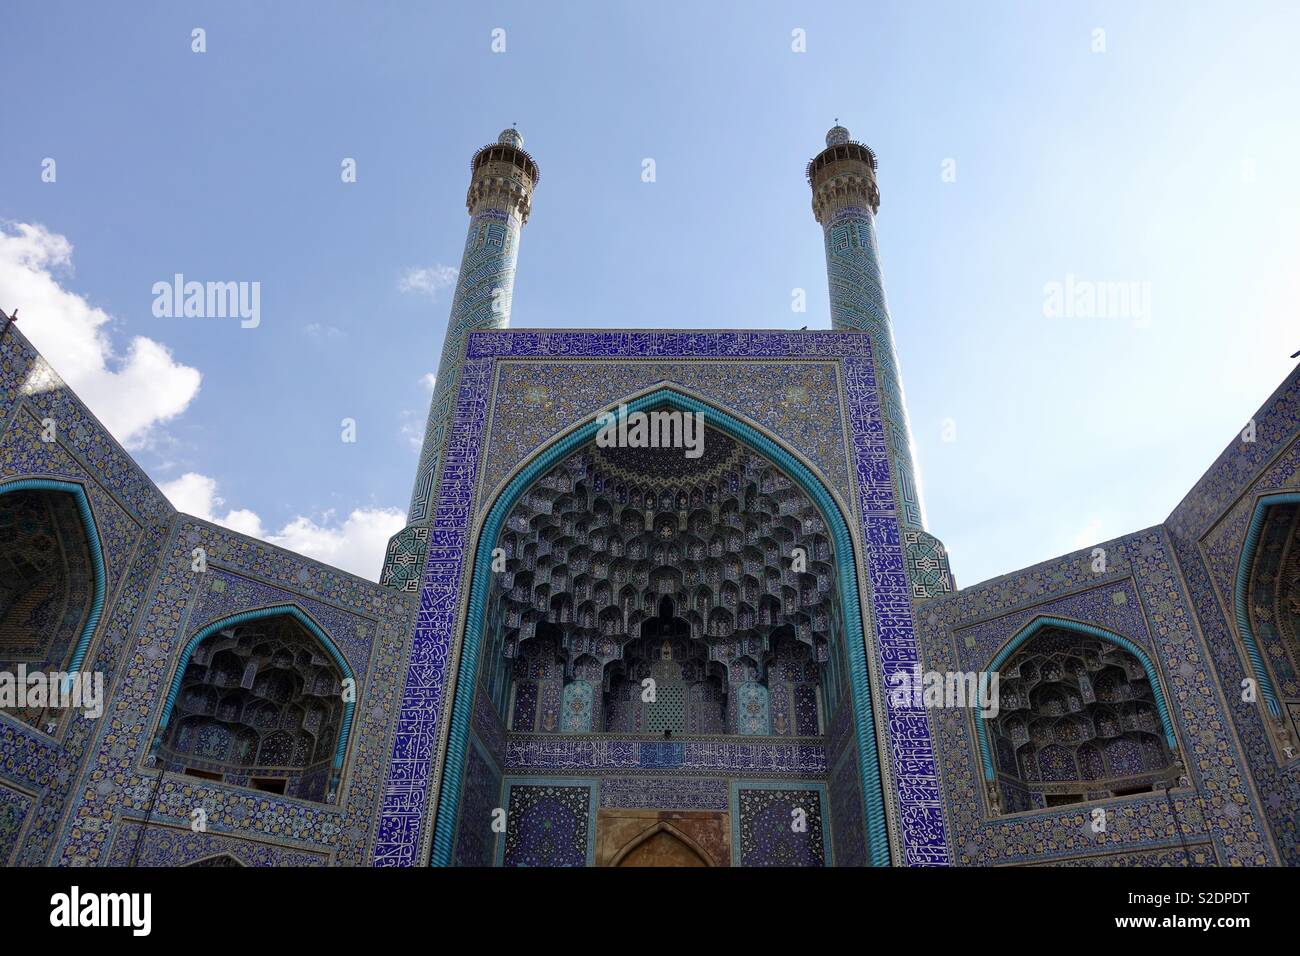 Entrance to a mosque in Isfahan Iran Stock Photo